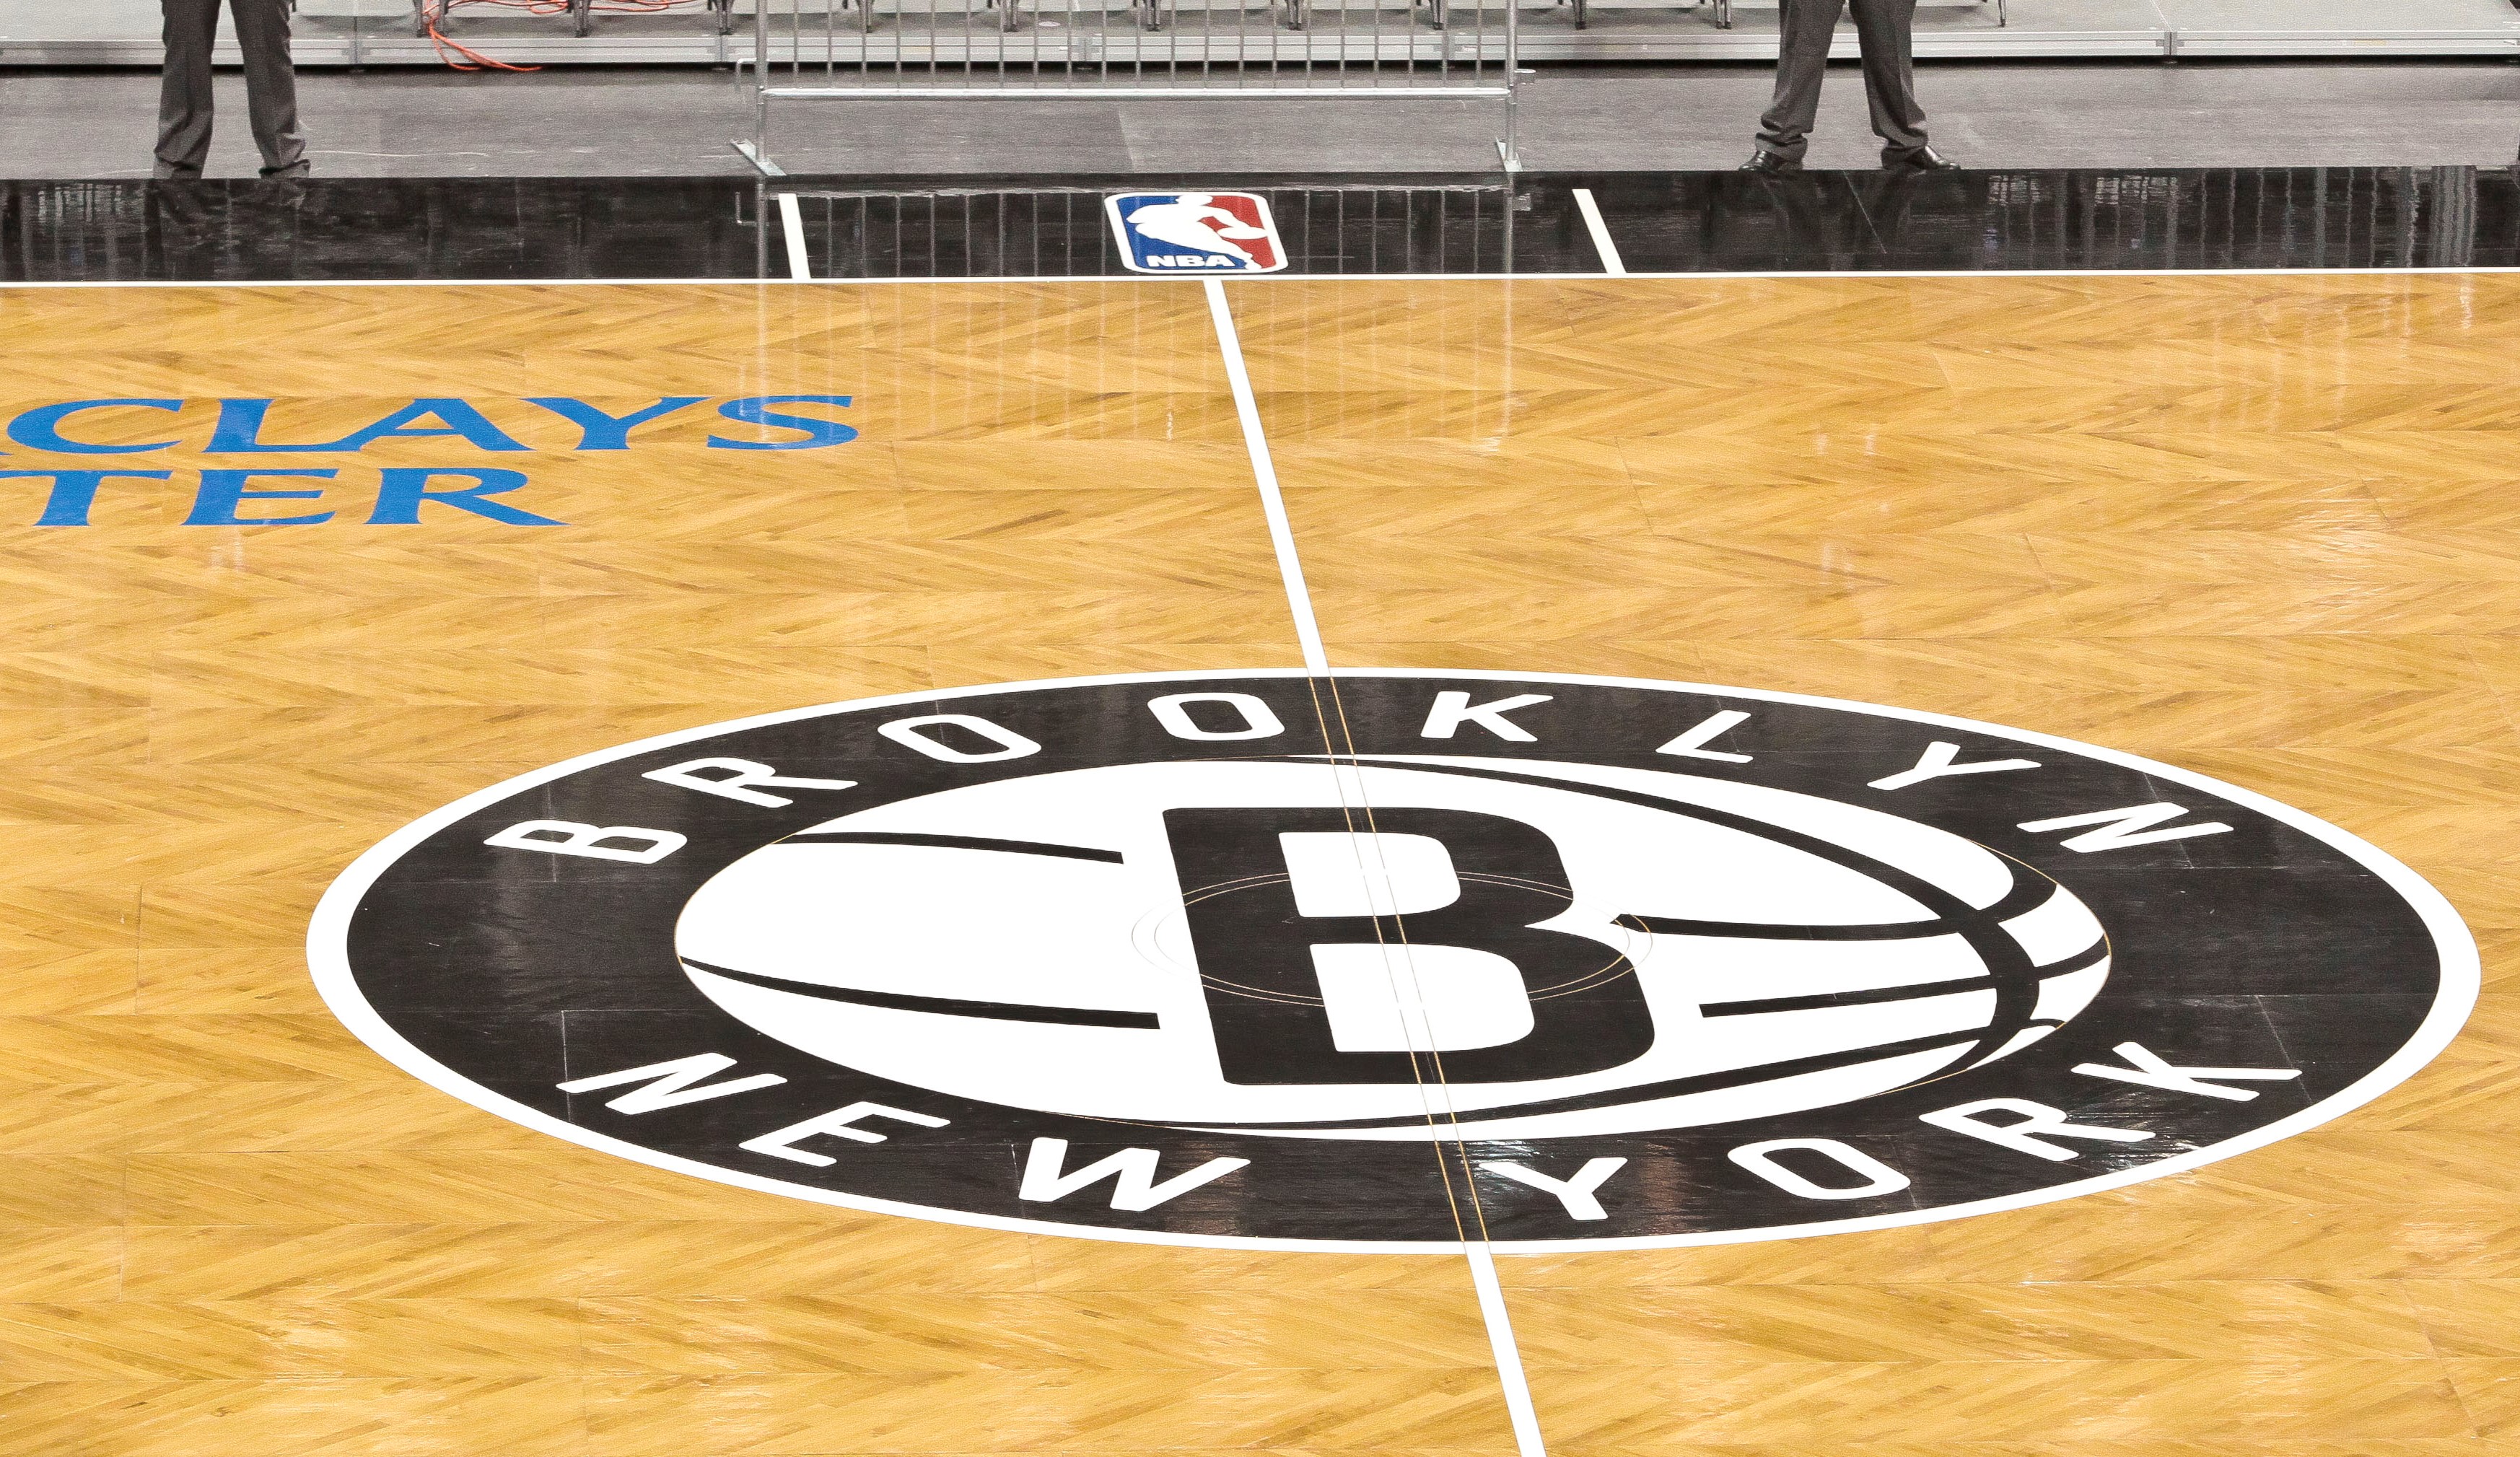 It's open! Ceremonial ribbon-cutting marks Barclays Center debut